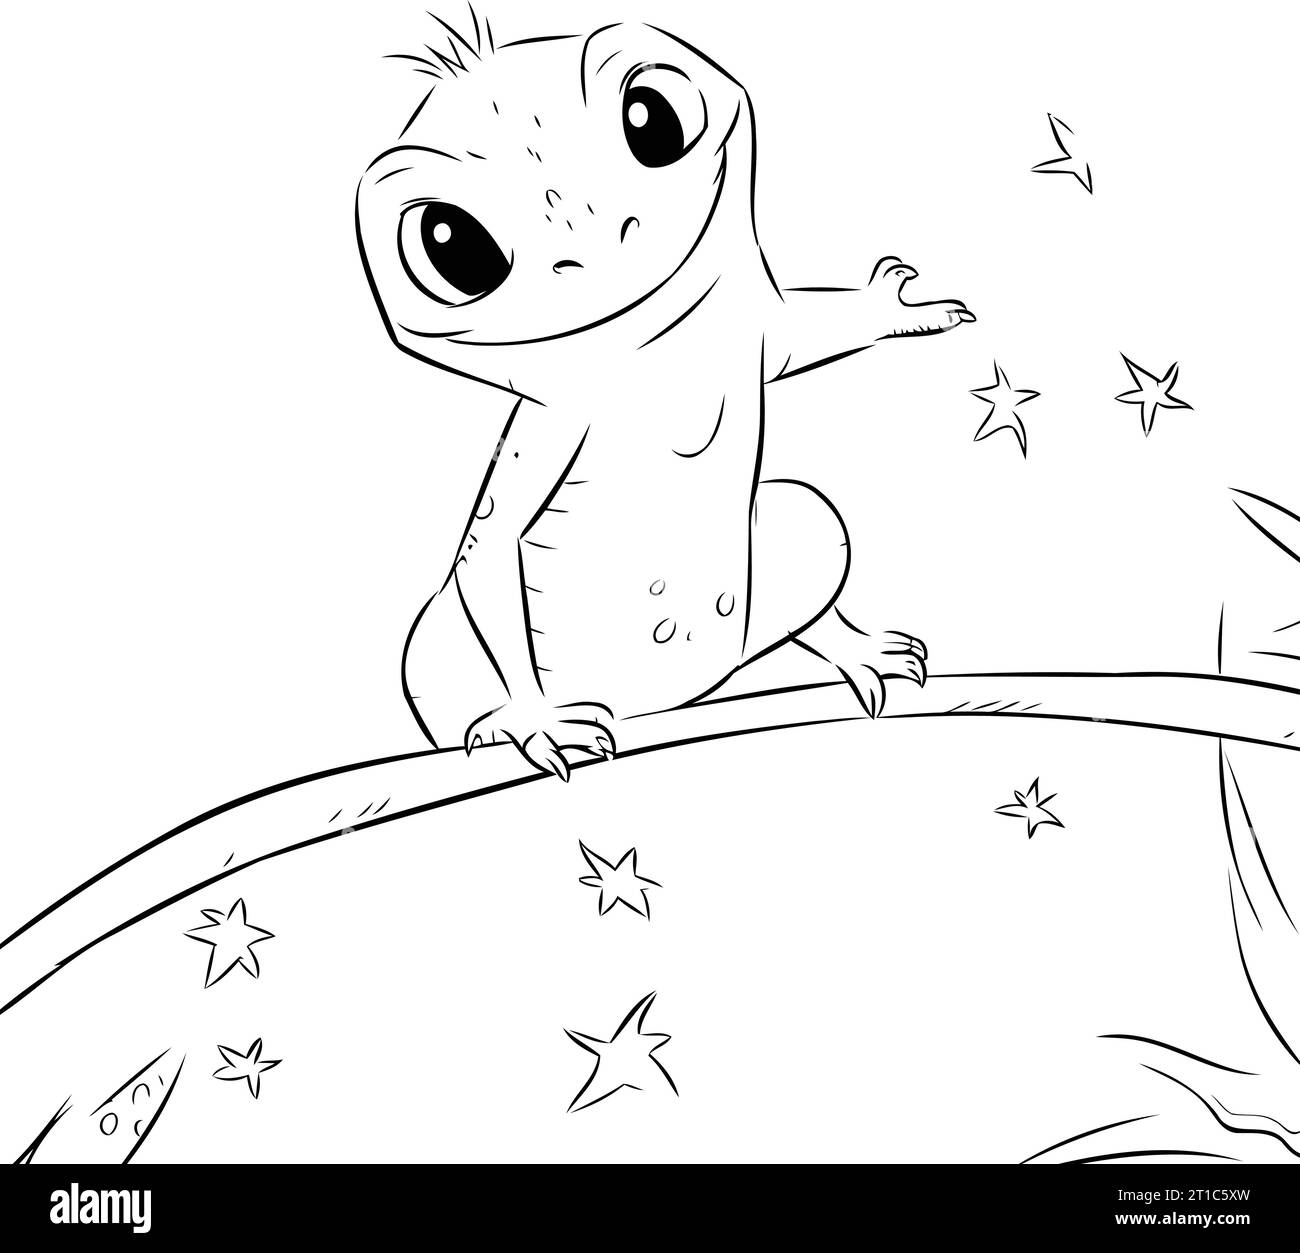 Cute cartoon frog. Hand drawn vector illustration for coloring book. Stock Vector